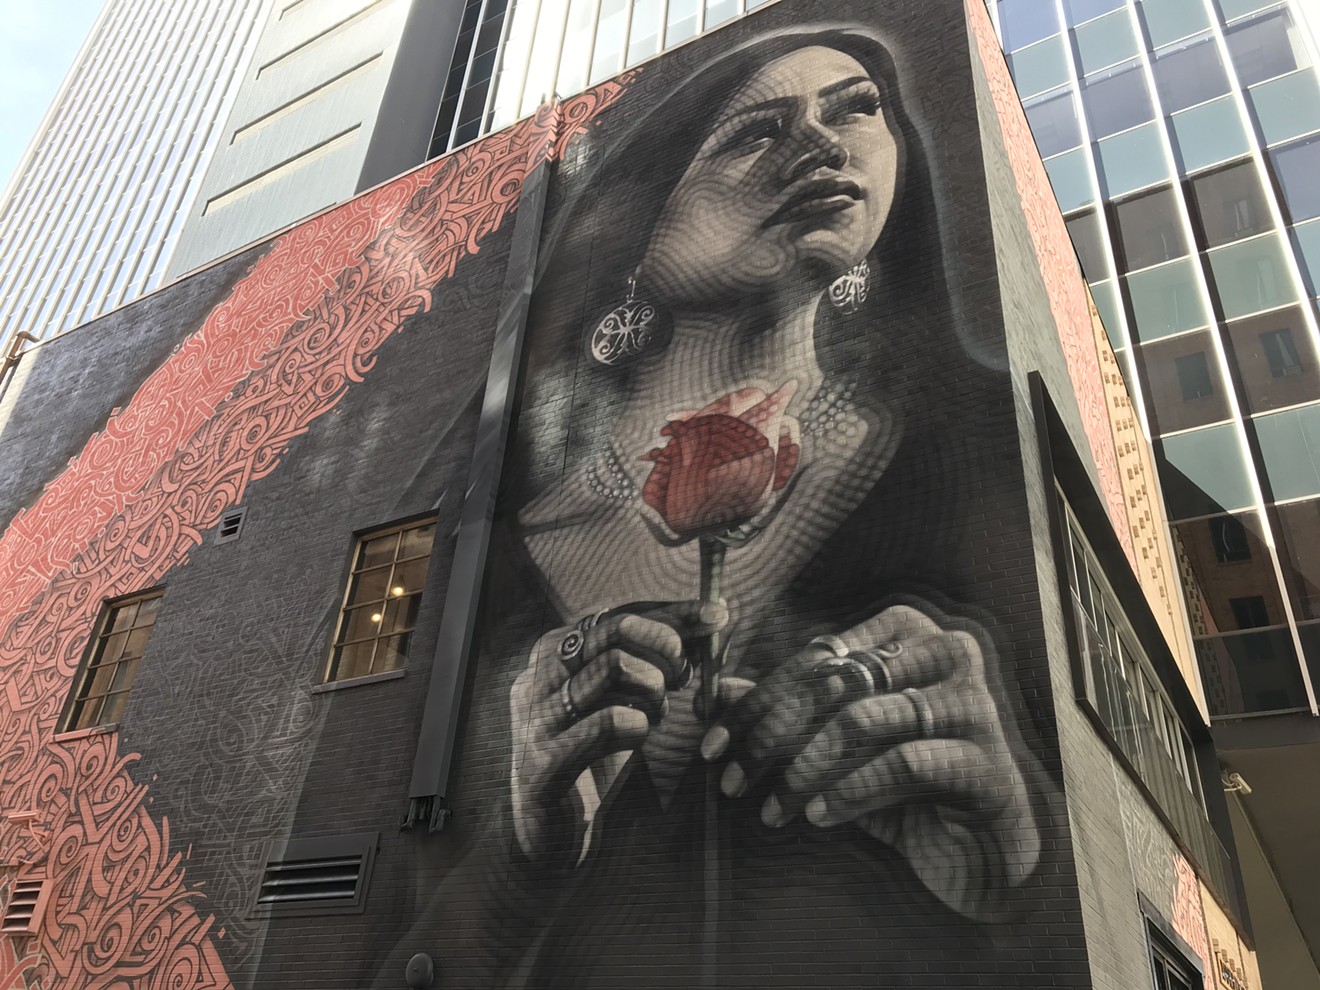 Exploring the detailed line work by El Mac and Breeze in downtown Phoenix.